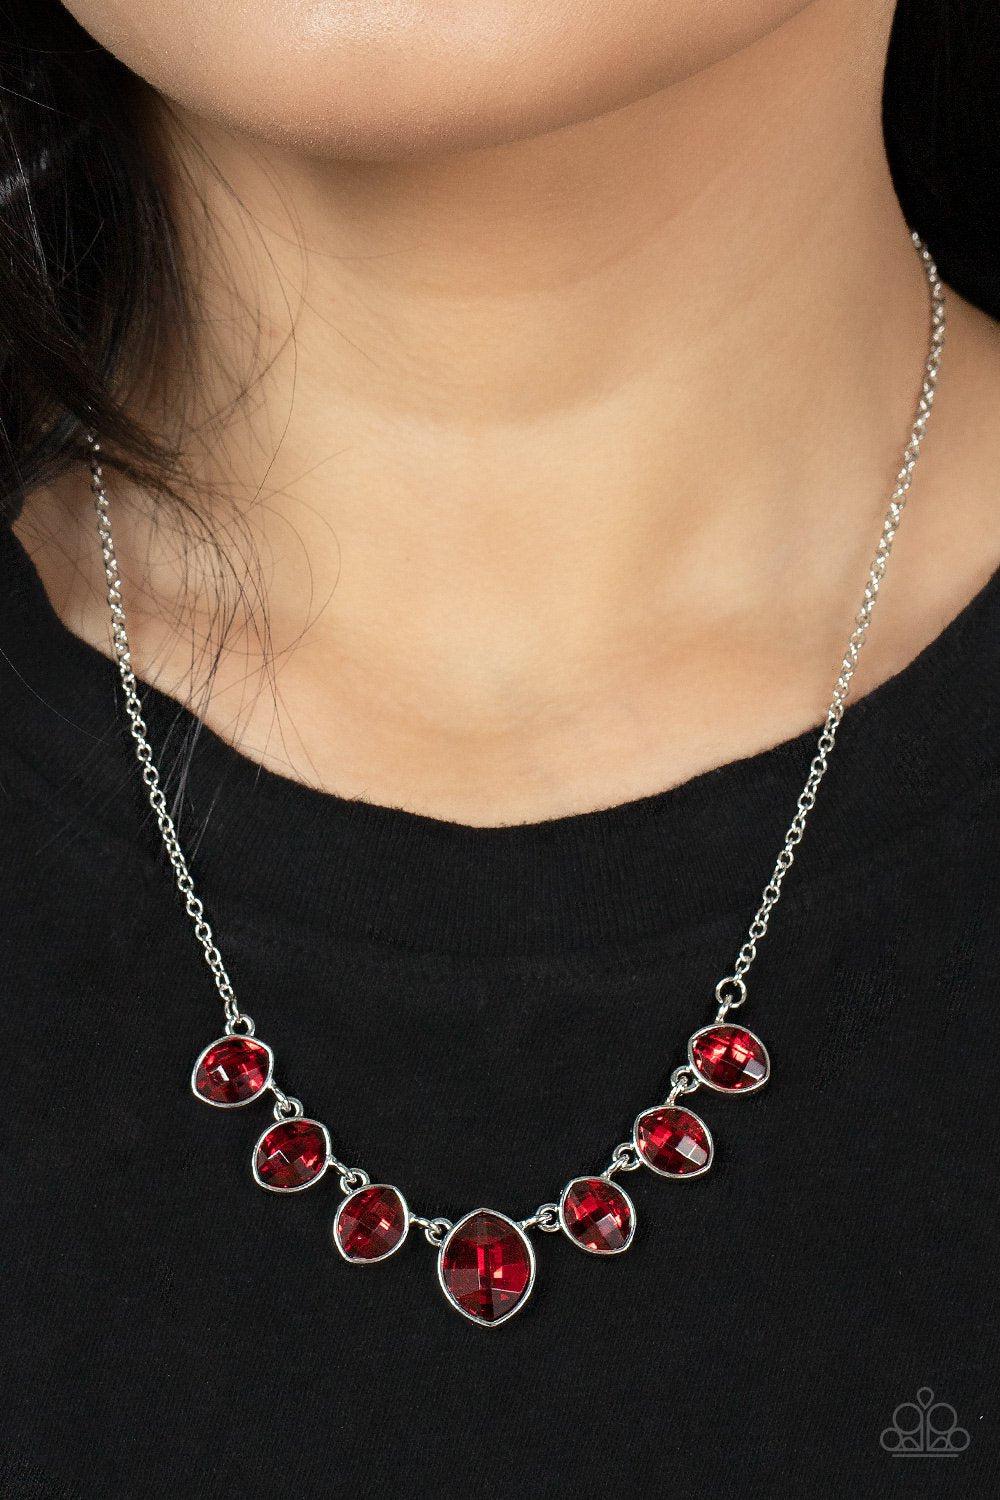 Material Girl Glamour Red Rhinestone Necklace - Paparazzi Accessories- lightbox - CarasShop.com - $5 Jewelry by Cara Jewels